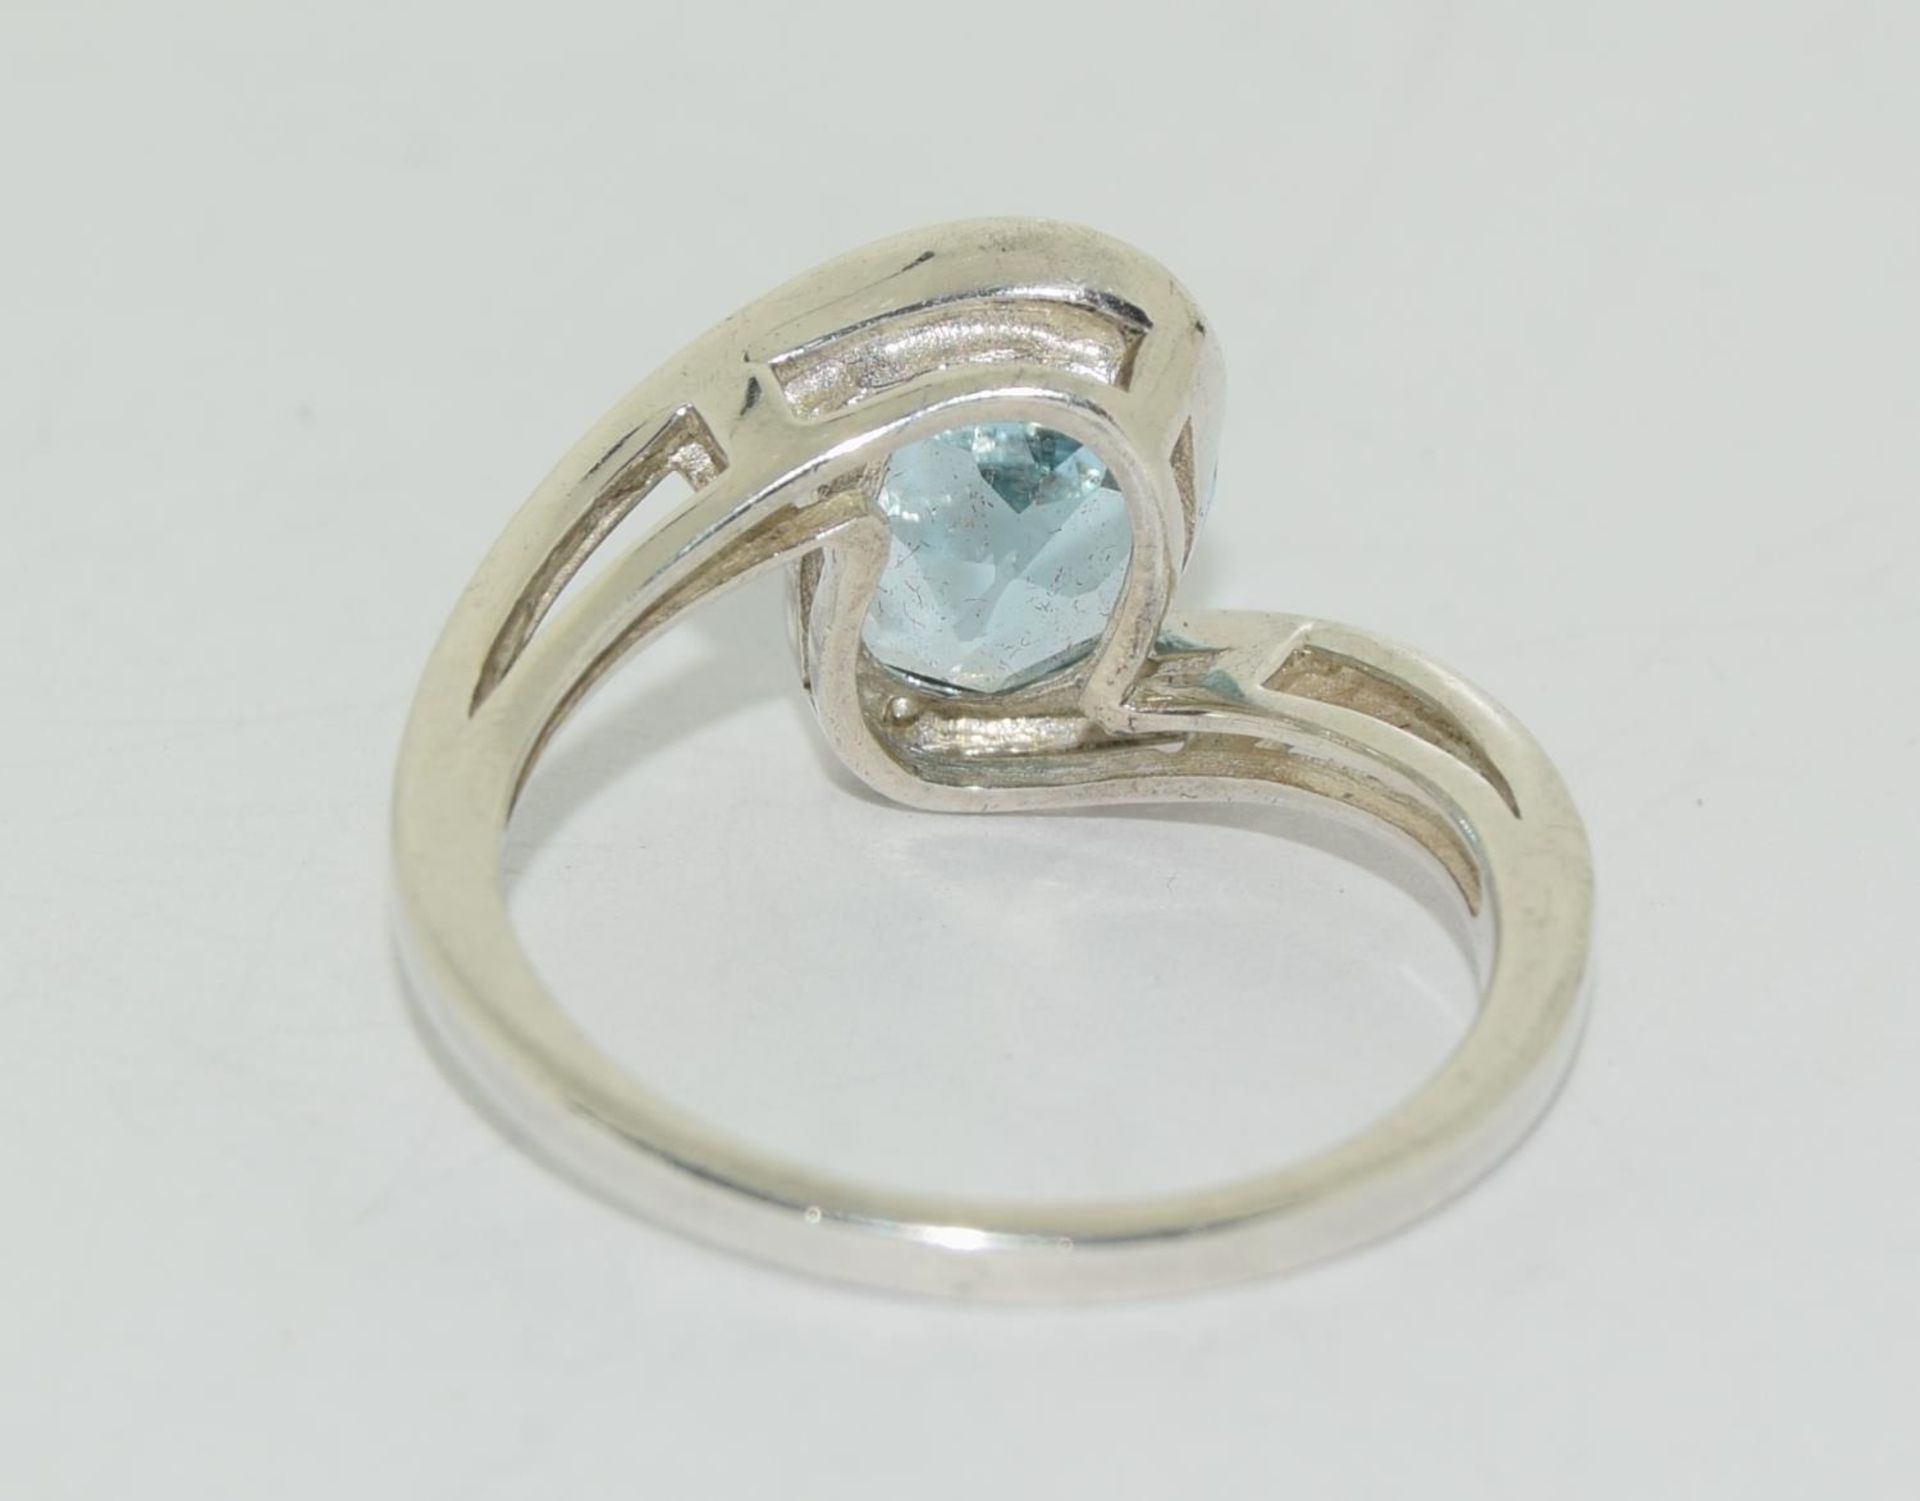 Lovely ice blue topaz 925 silver solitaire ring. Size P 1/2. - Image 3 of 3